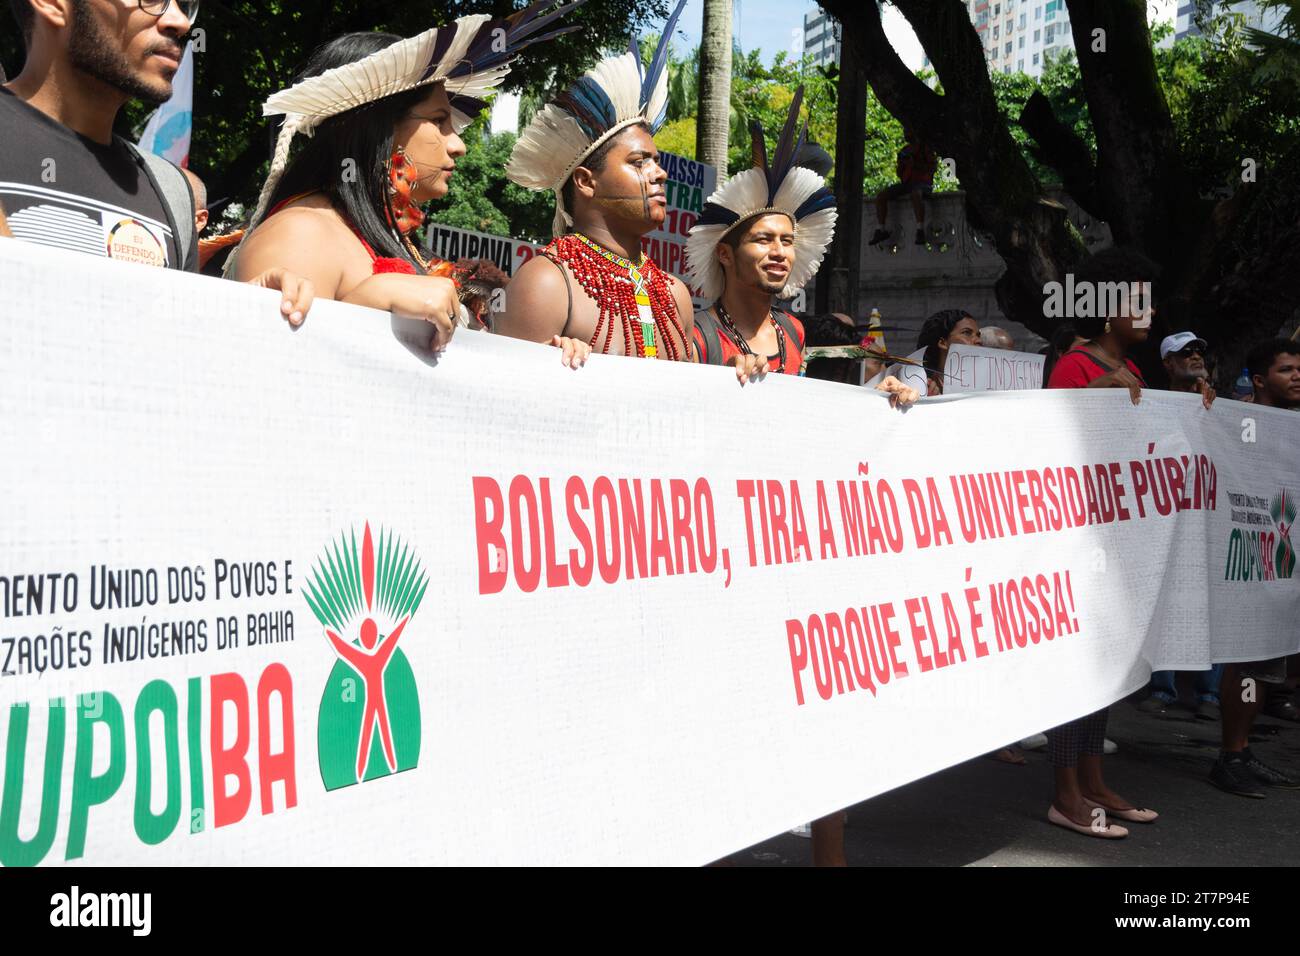 Salvador, Bahia, Brazil - May 30, 2019: People are protesting, with banners, against the cuts in education funds by President Jair Bolsonaro in the ci Stock Photo